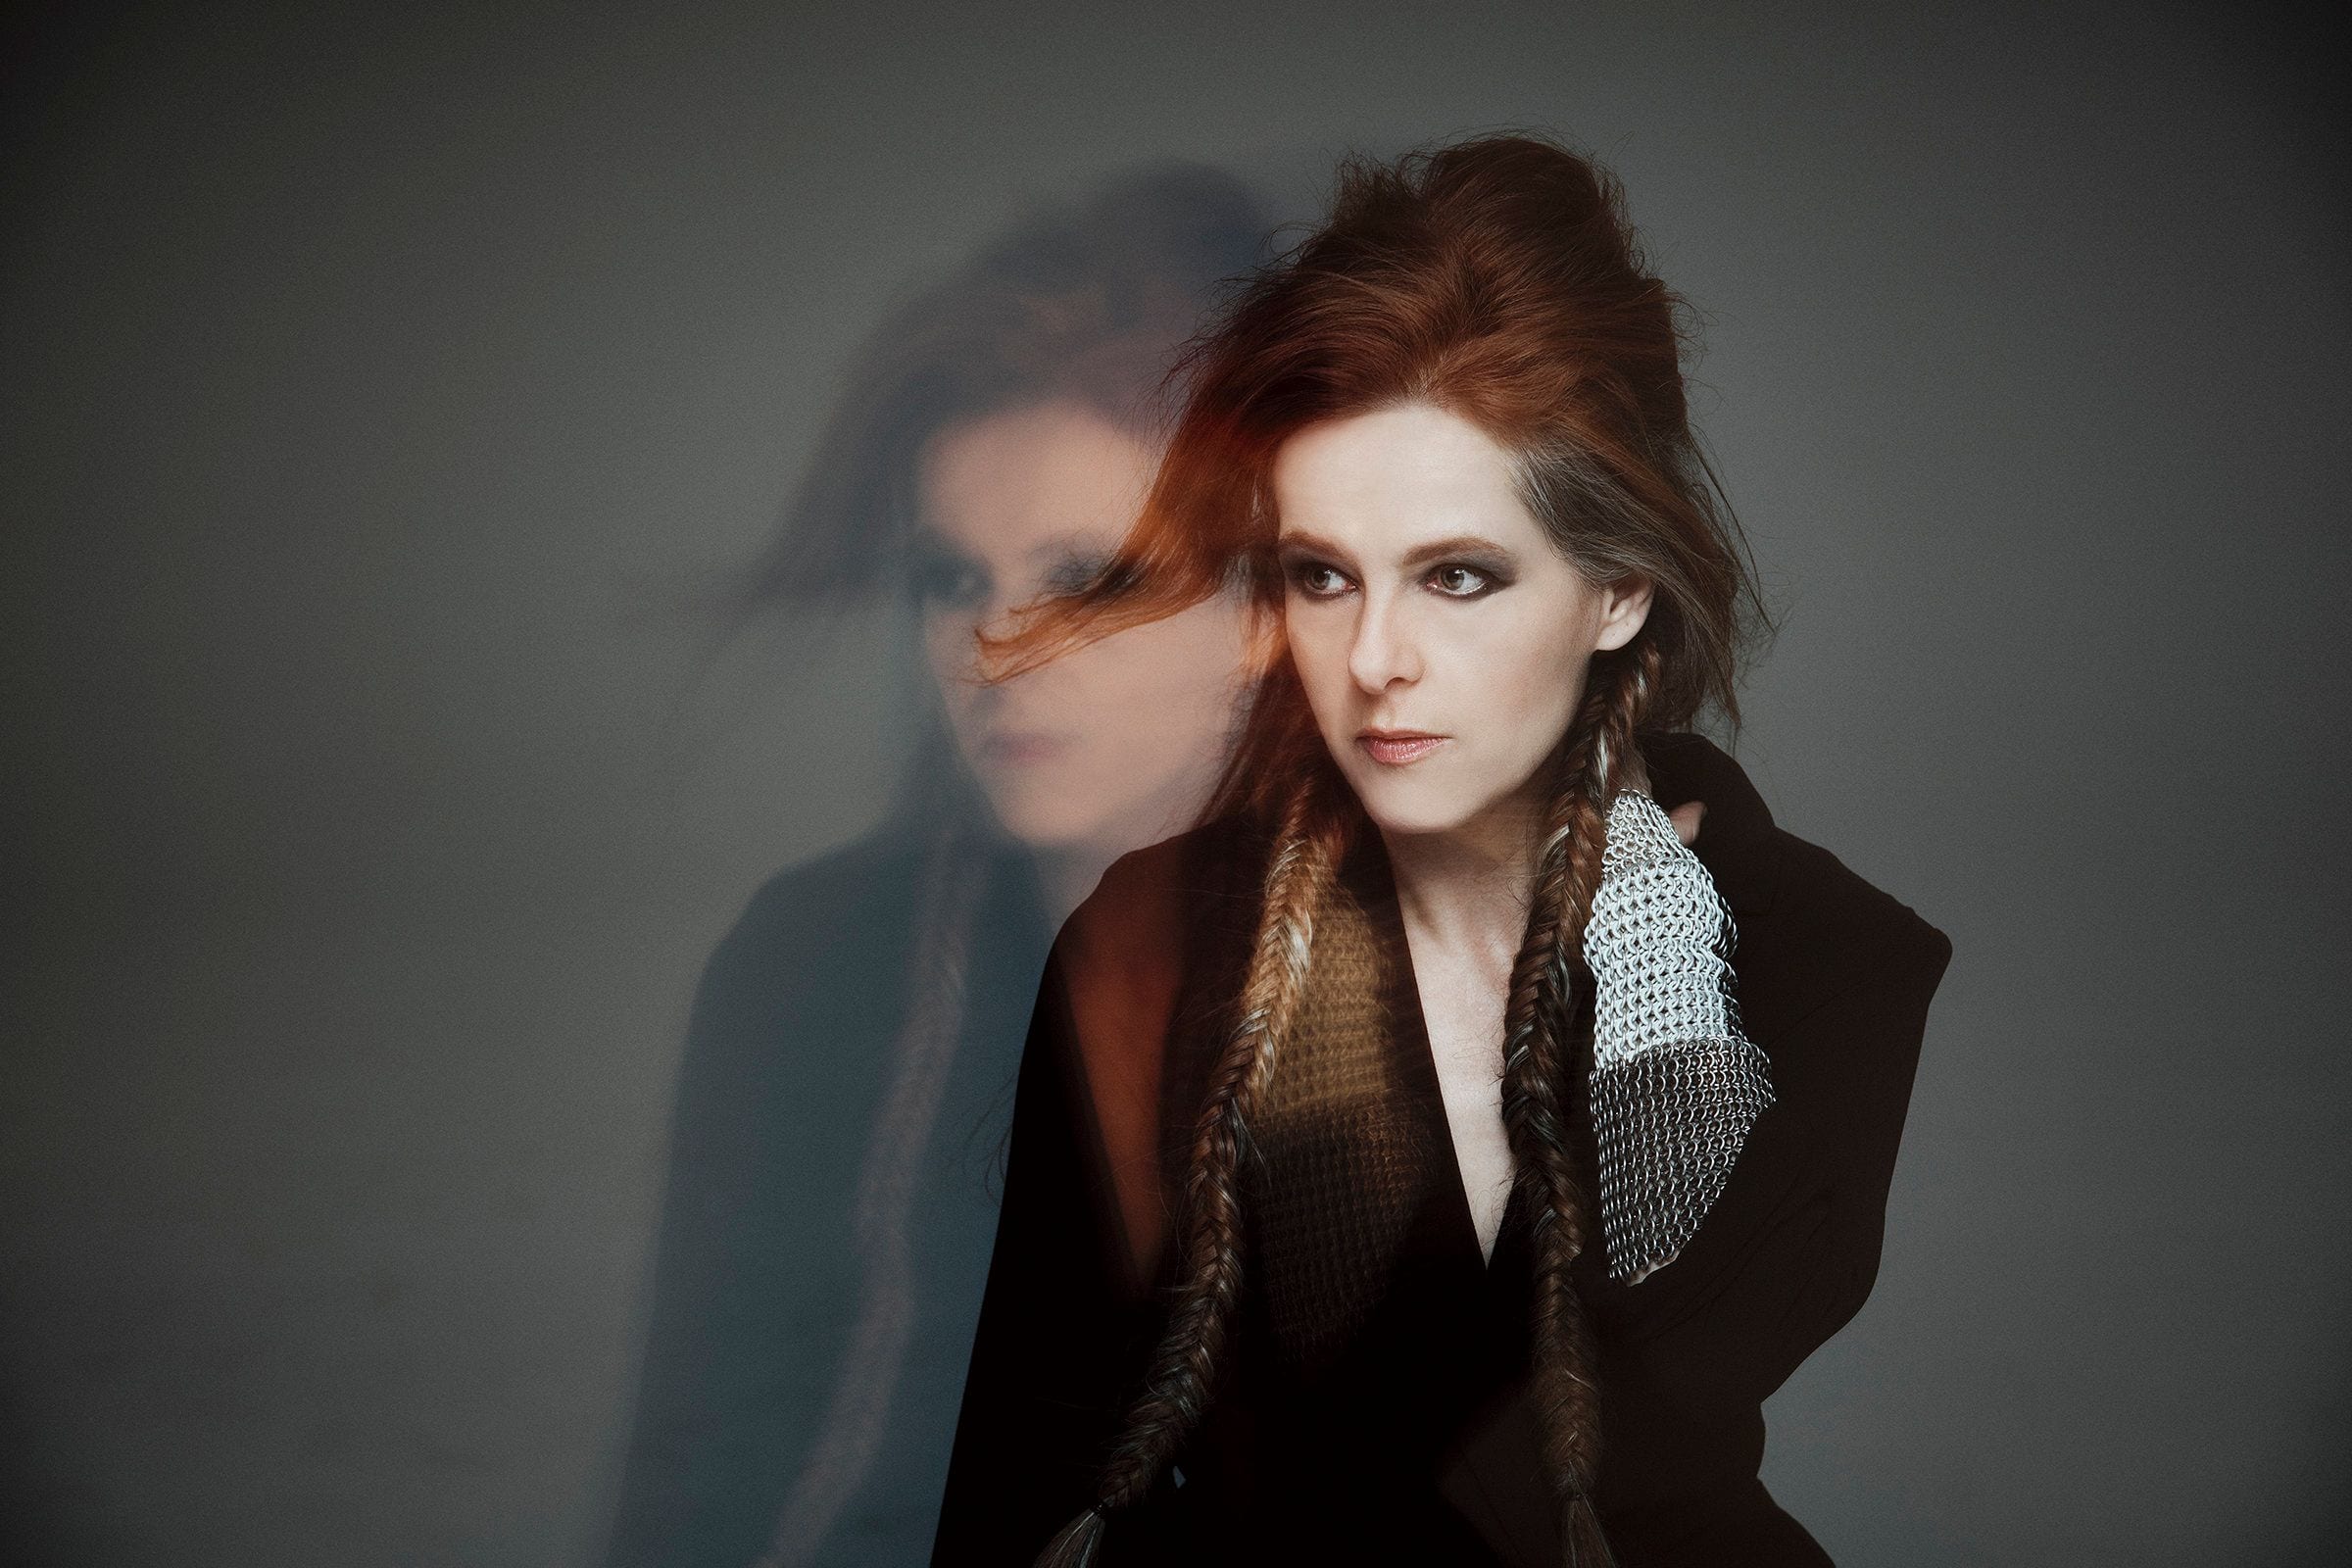 Neko Case’s ‘Hell-On’ Has Just Enough Pop Touches to Round Out Its Idiosyncrasies